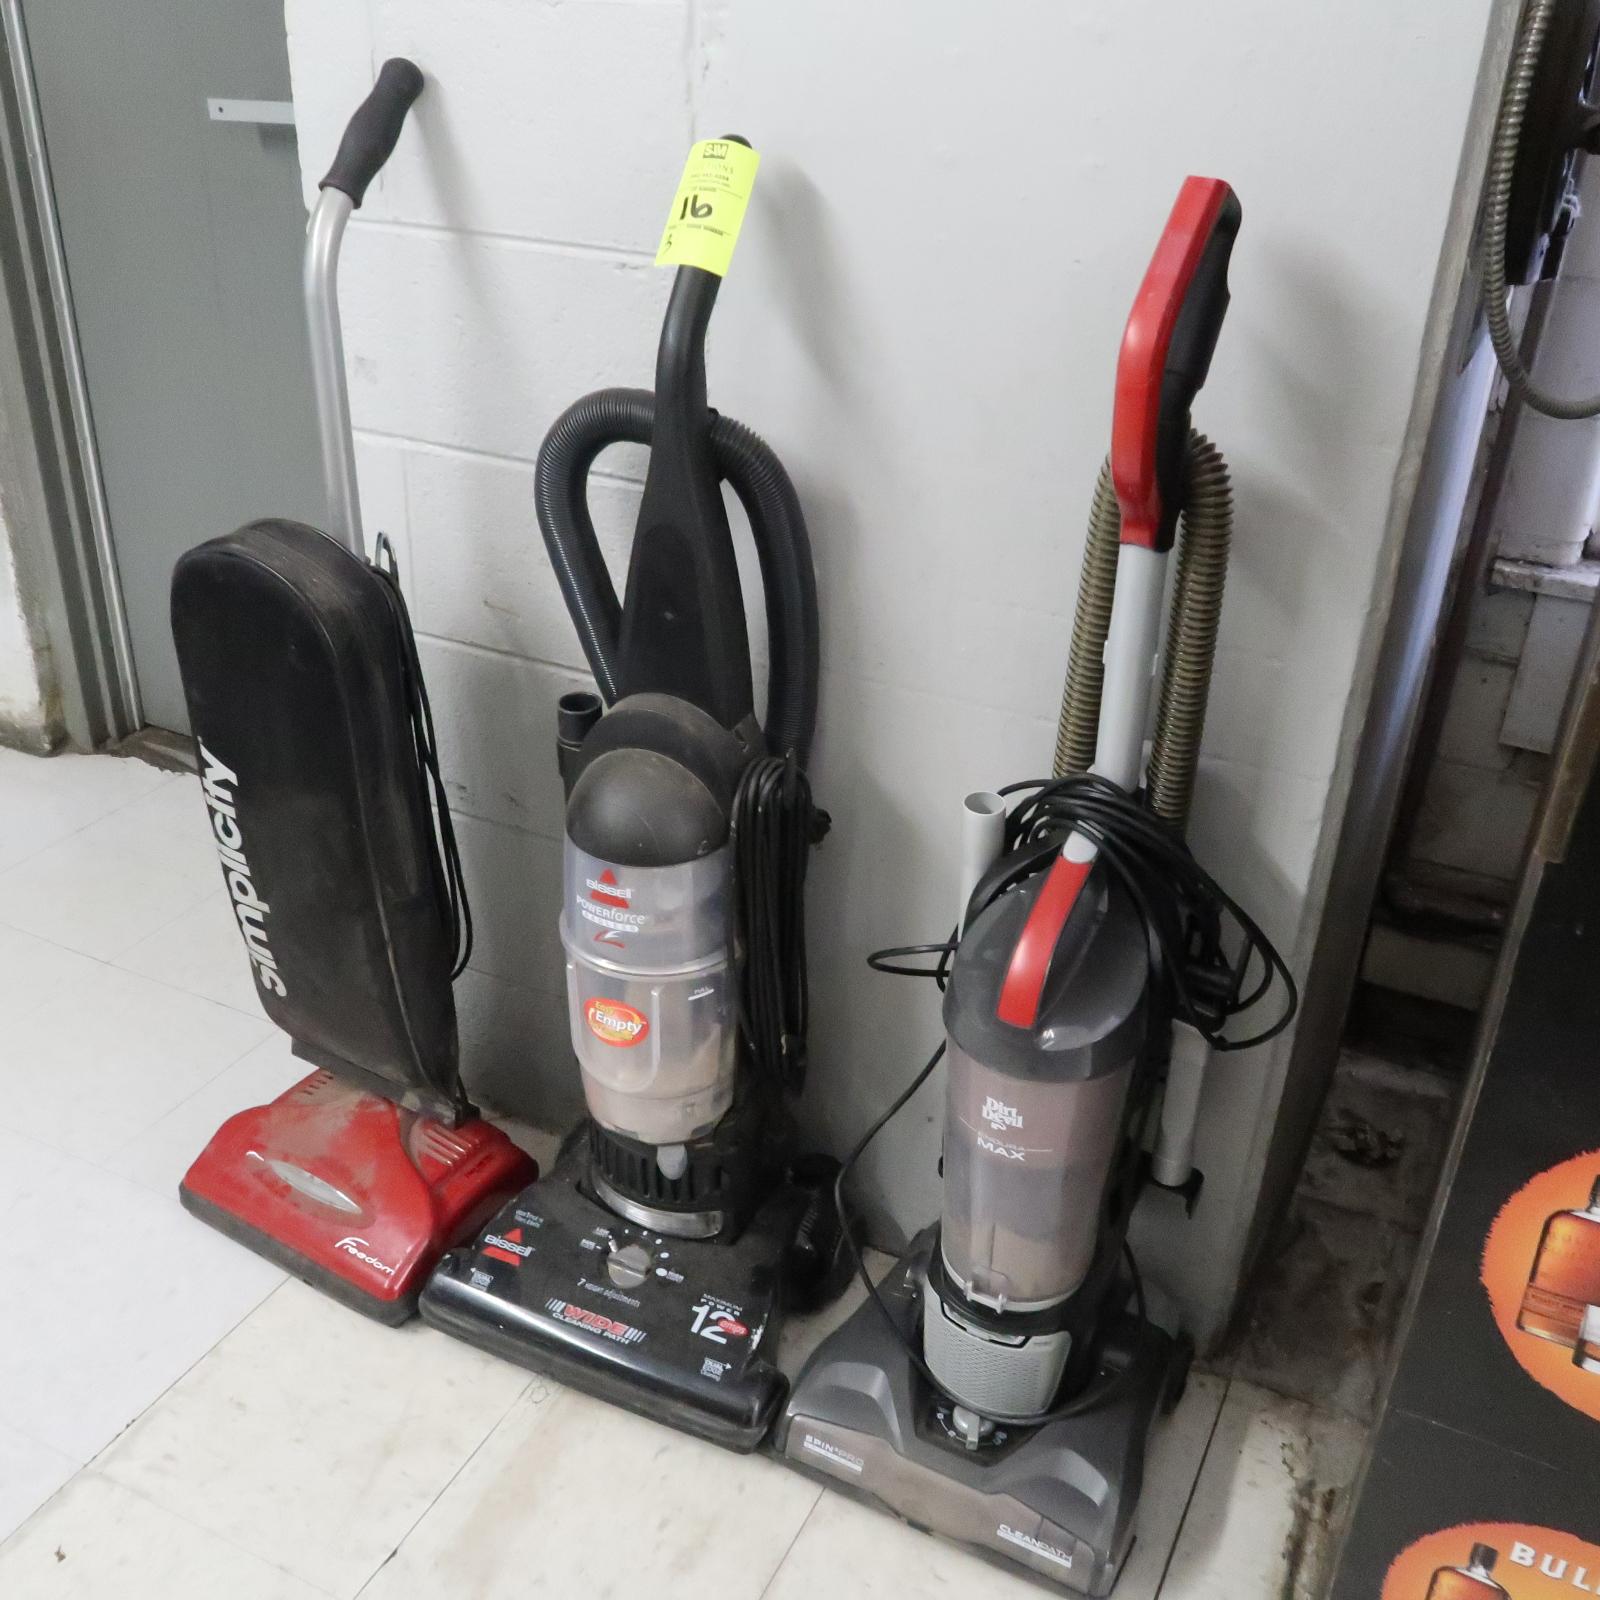 upright vacuum cleaners